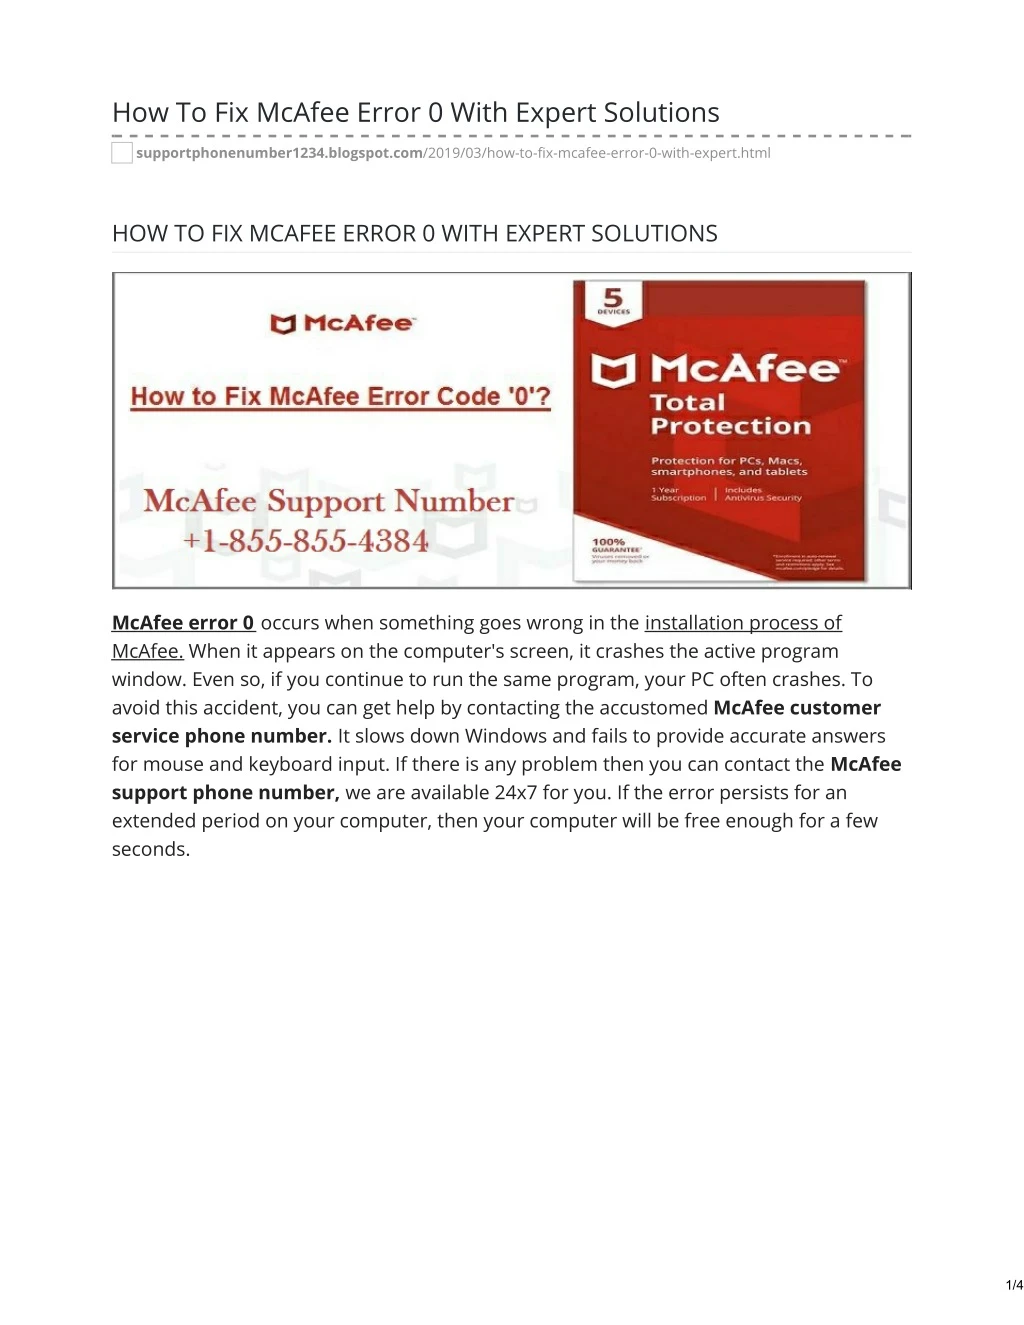 how to fix mcafee error 0 with expert solutions